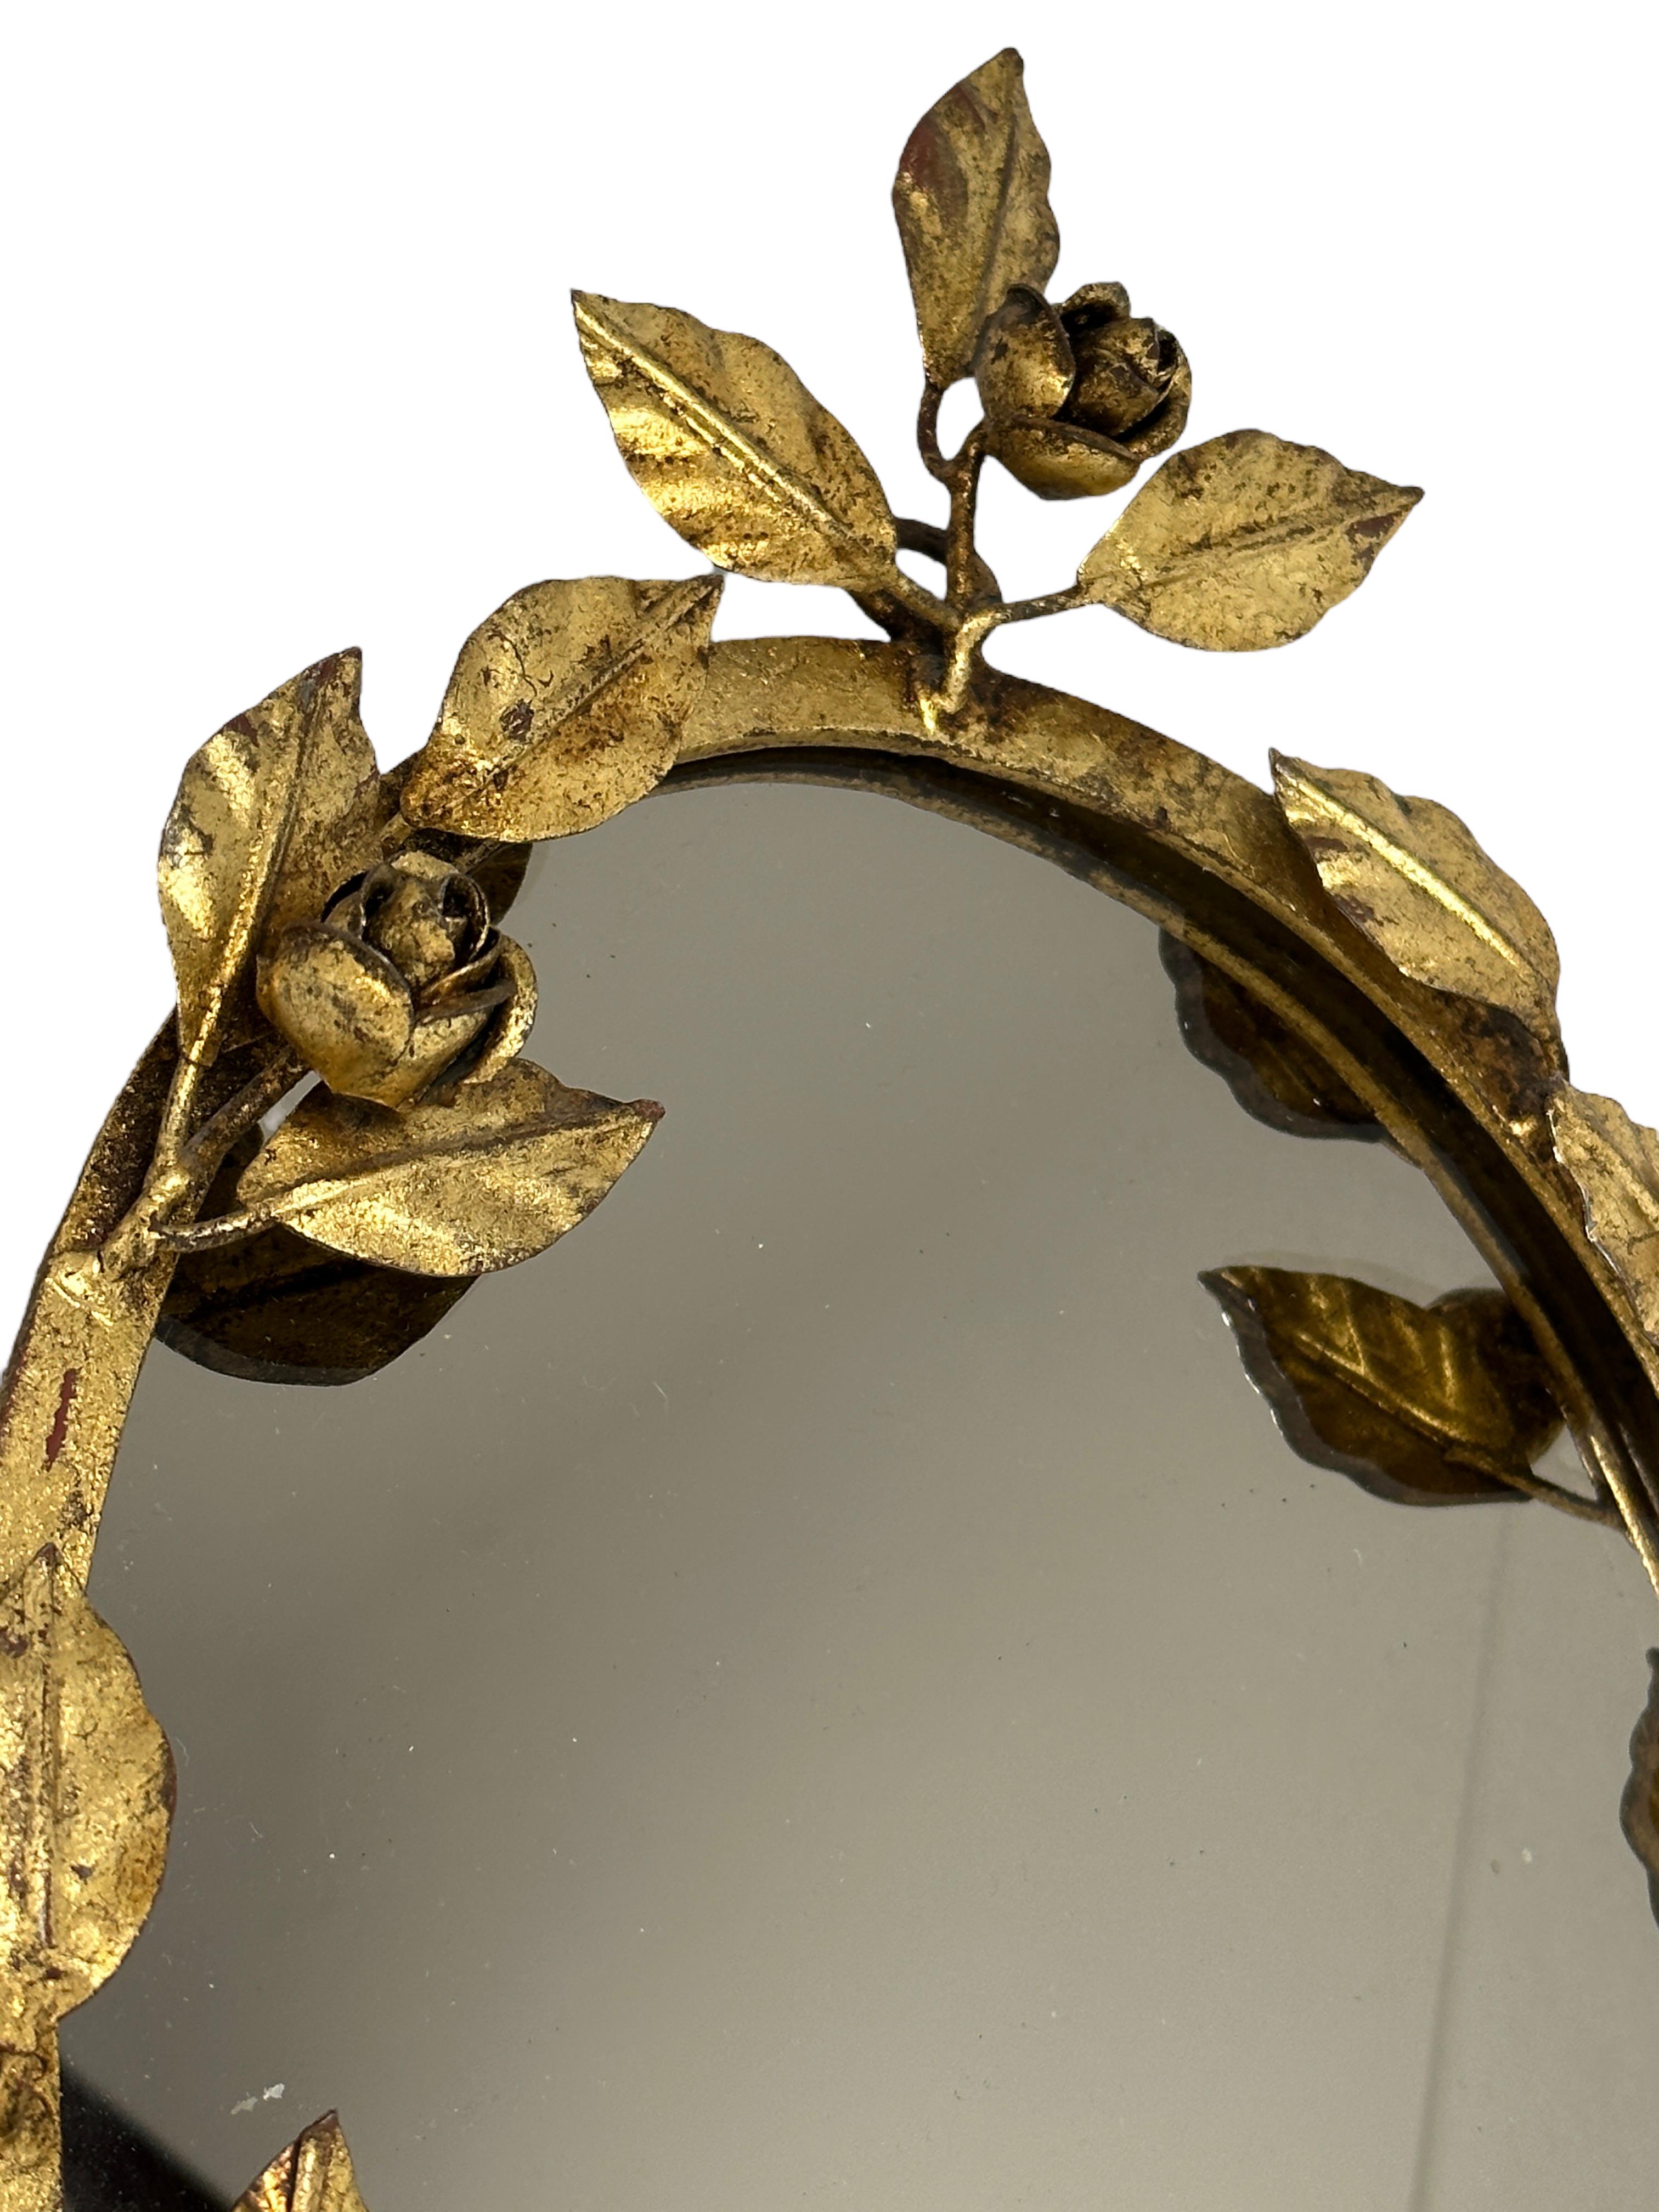 Gilt Roses Metal Hollywood Regency Vanity Mirror Toleware Tole Italy 1960s For Sale 2